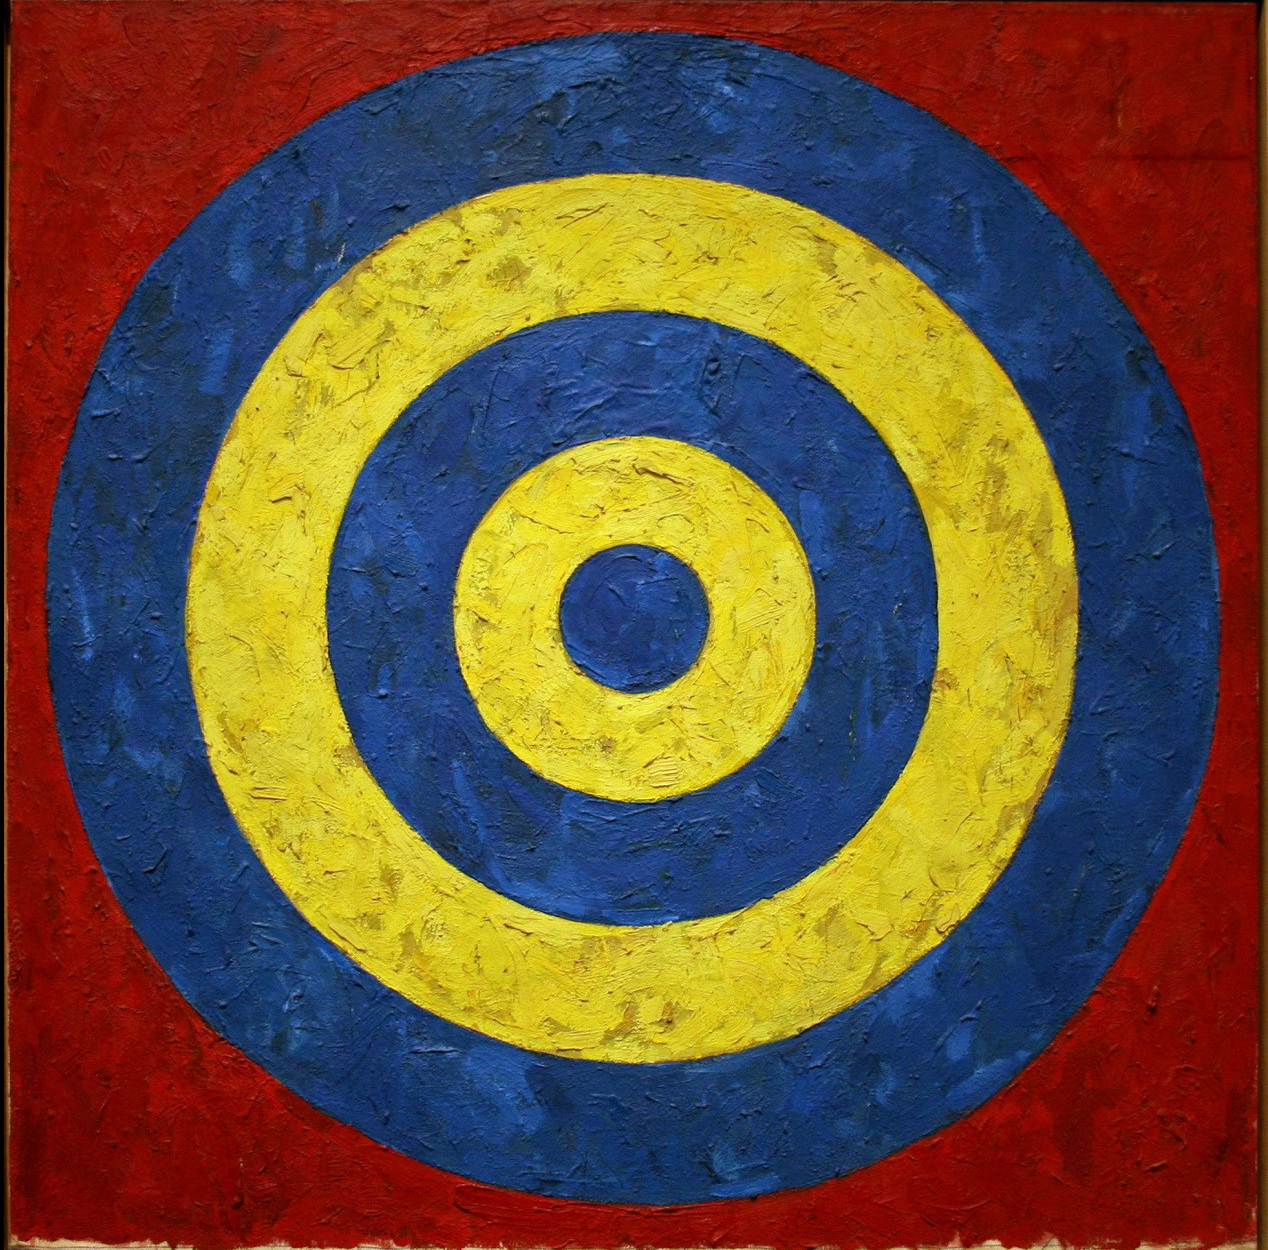 Target (1958) by Jasper Johns. As reproduced in our Phaidon Focus book